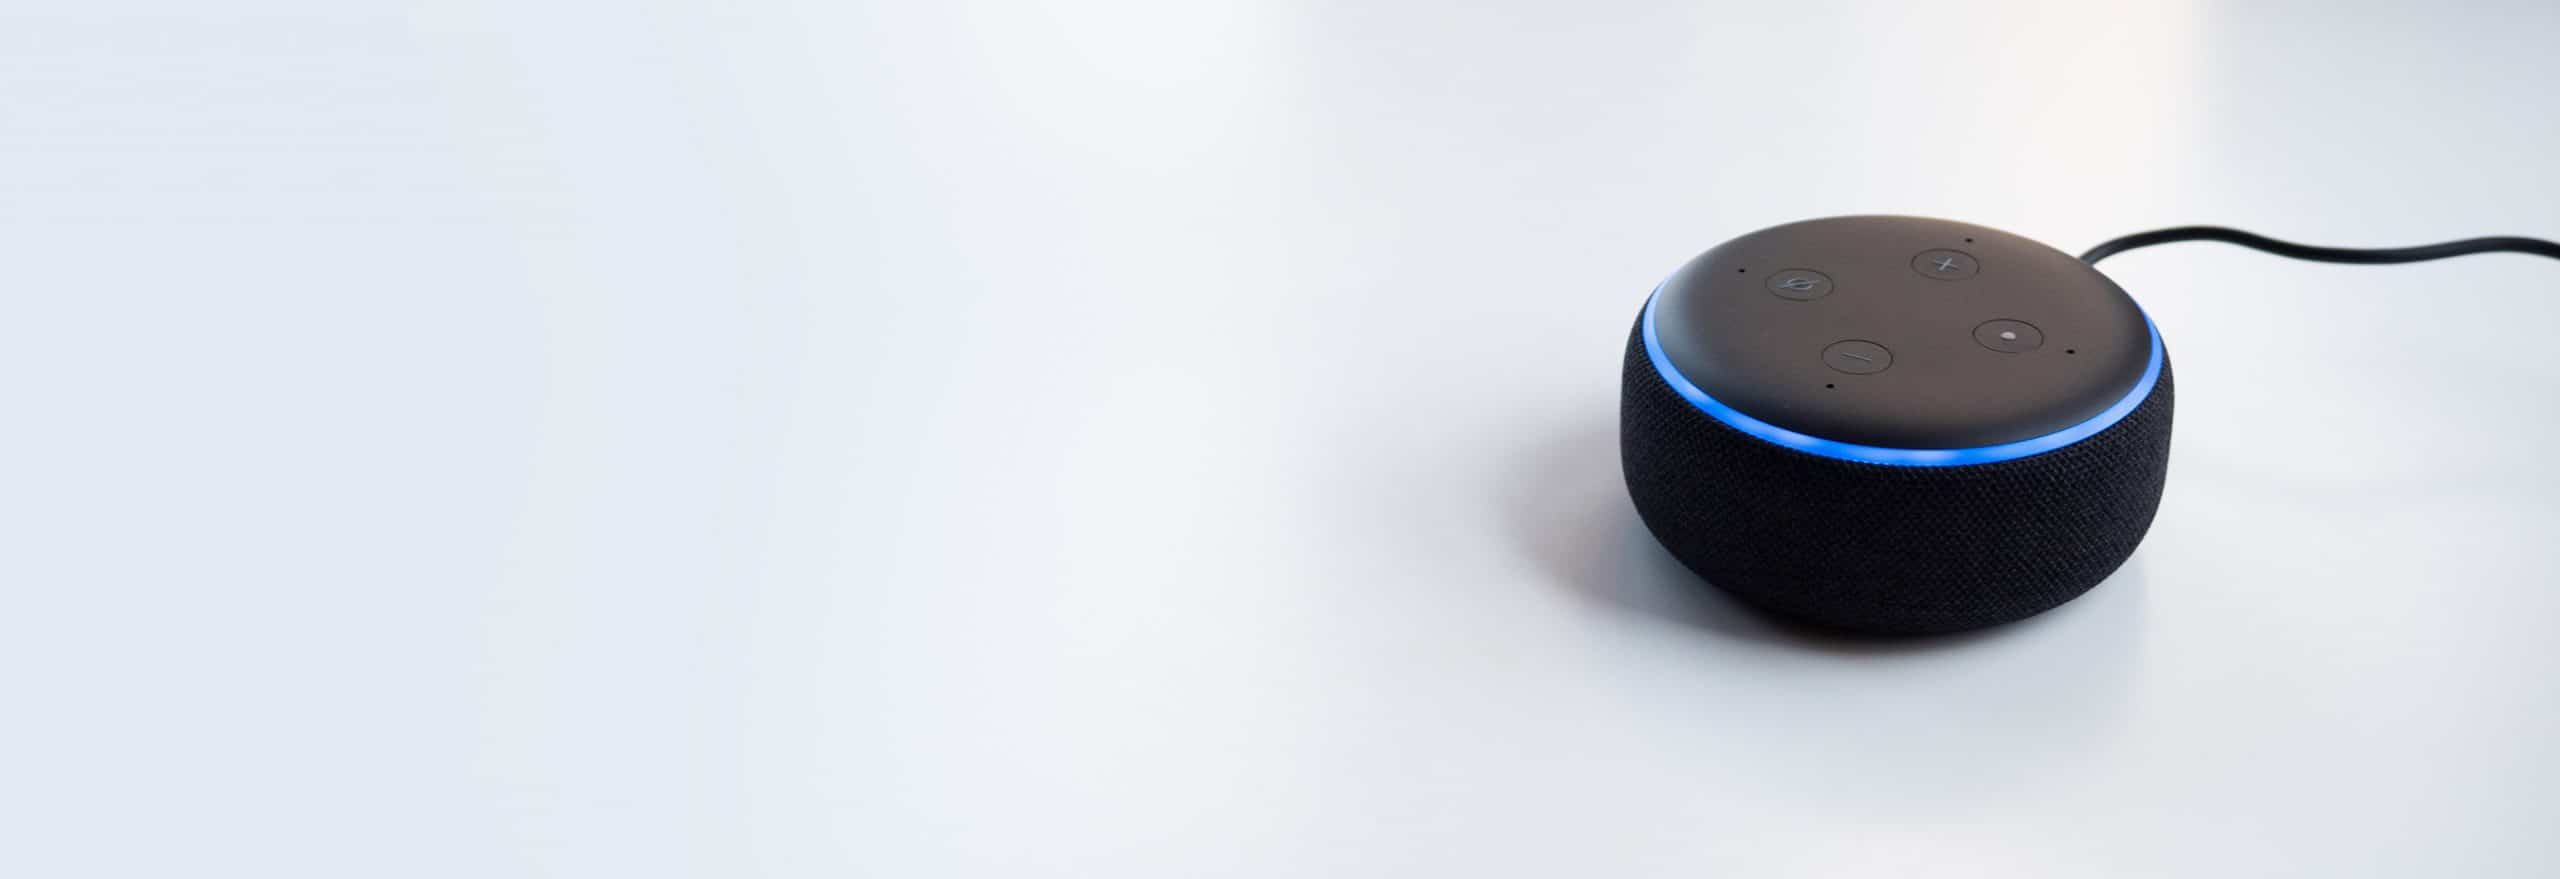 Google Smart Lock: The complete guide